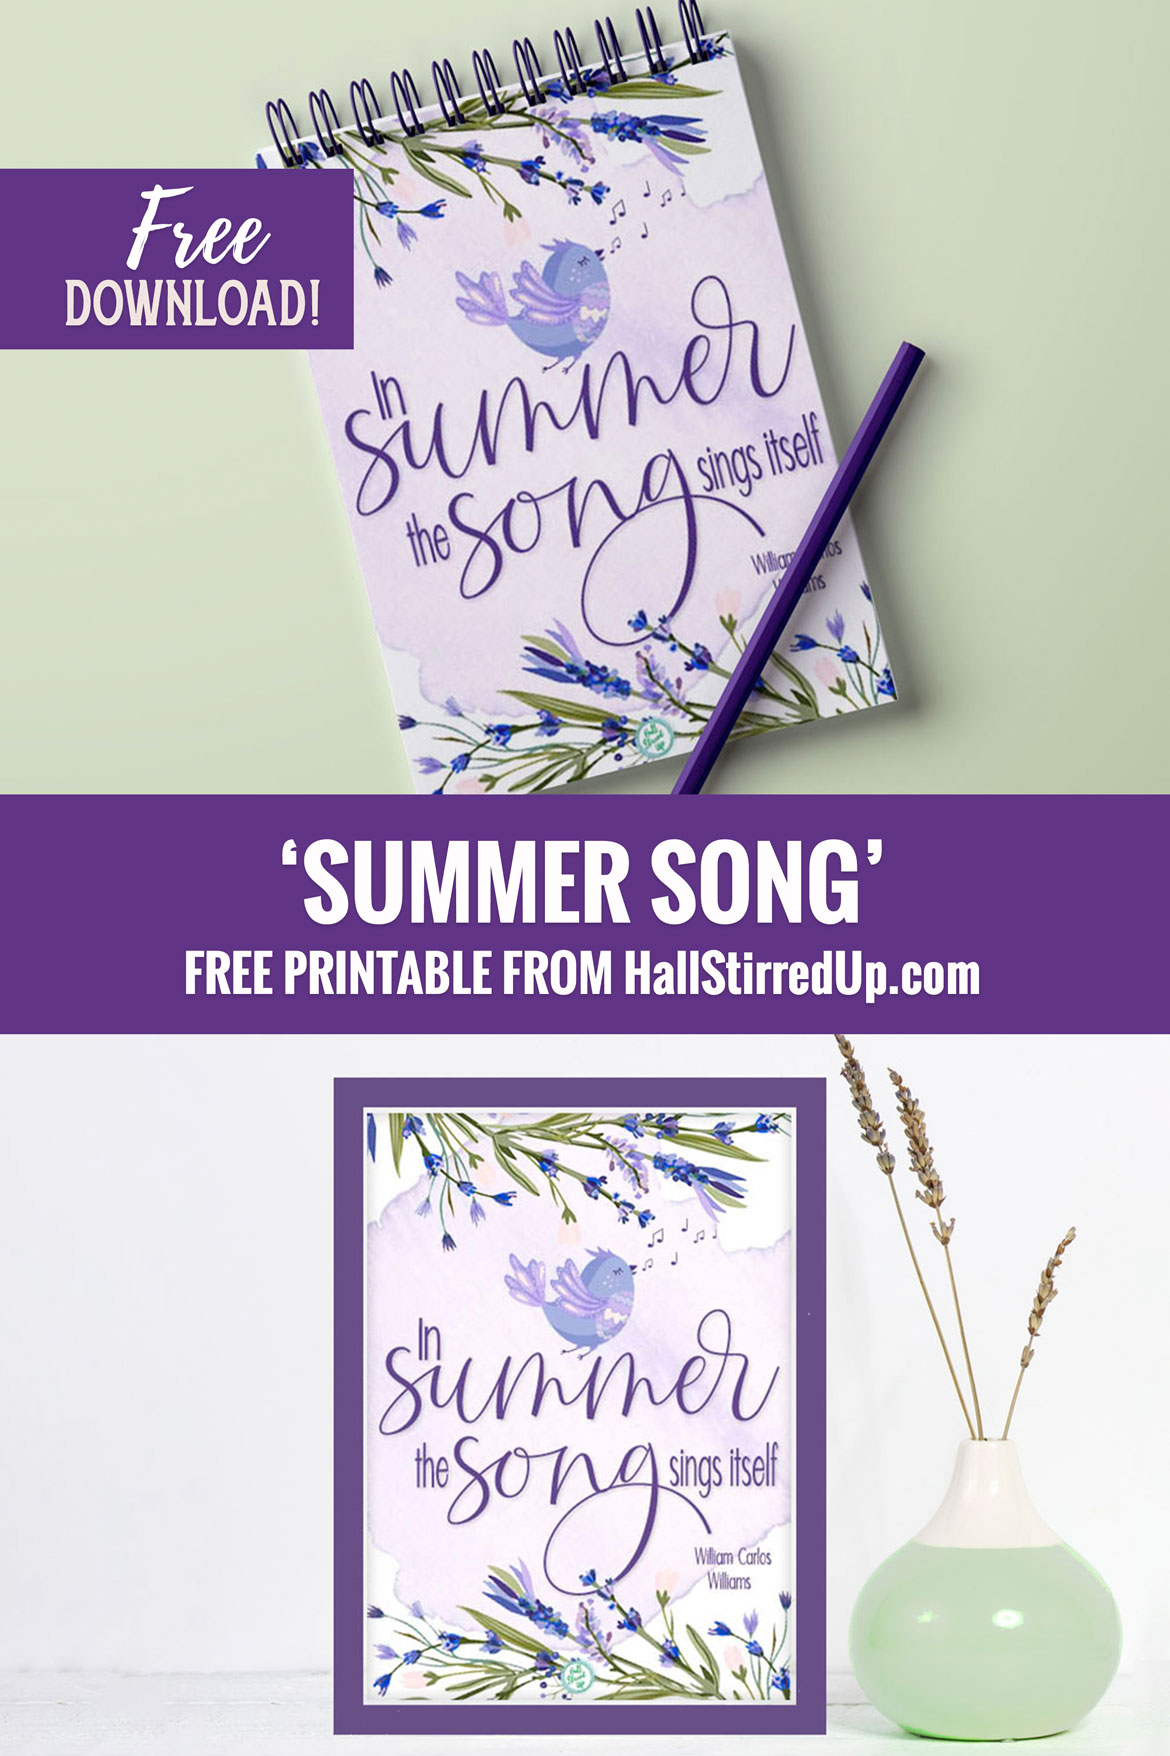 Pretty Summer Song quote and a new free printable